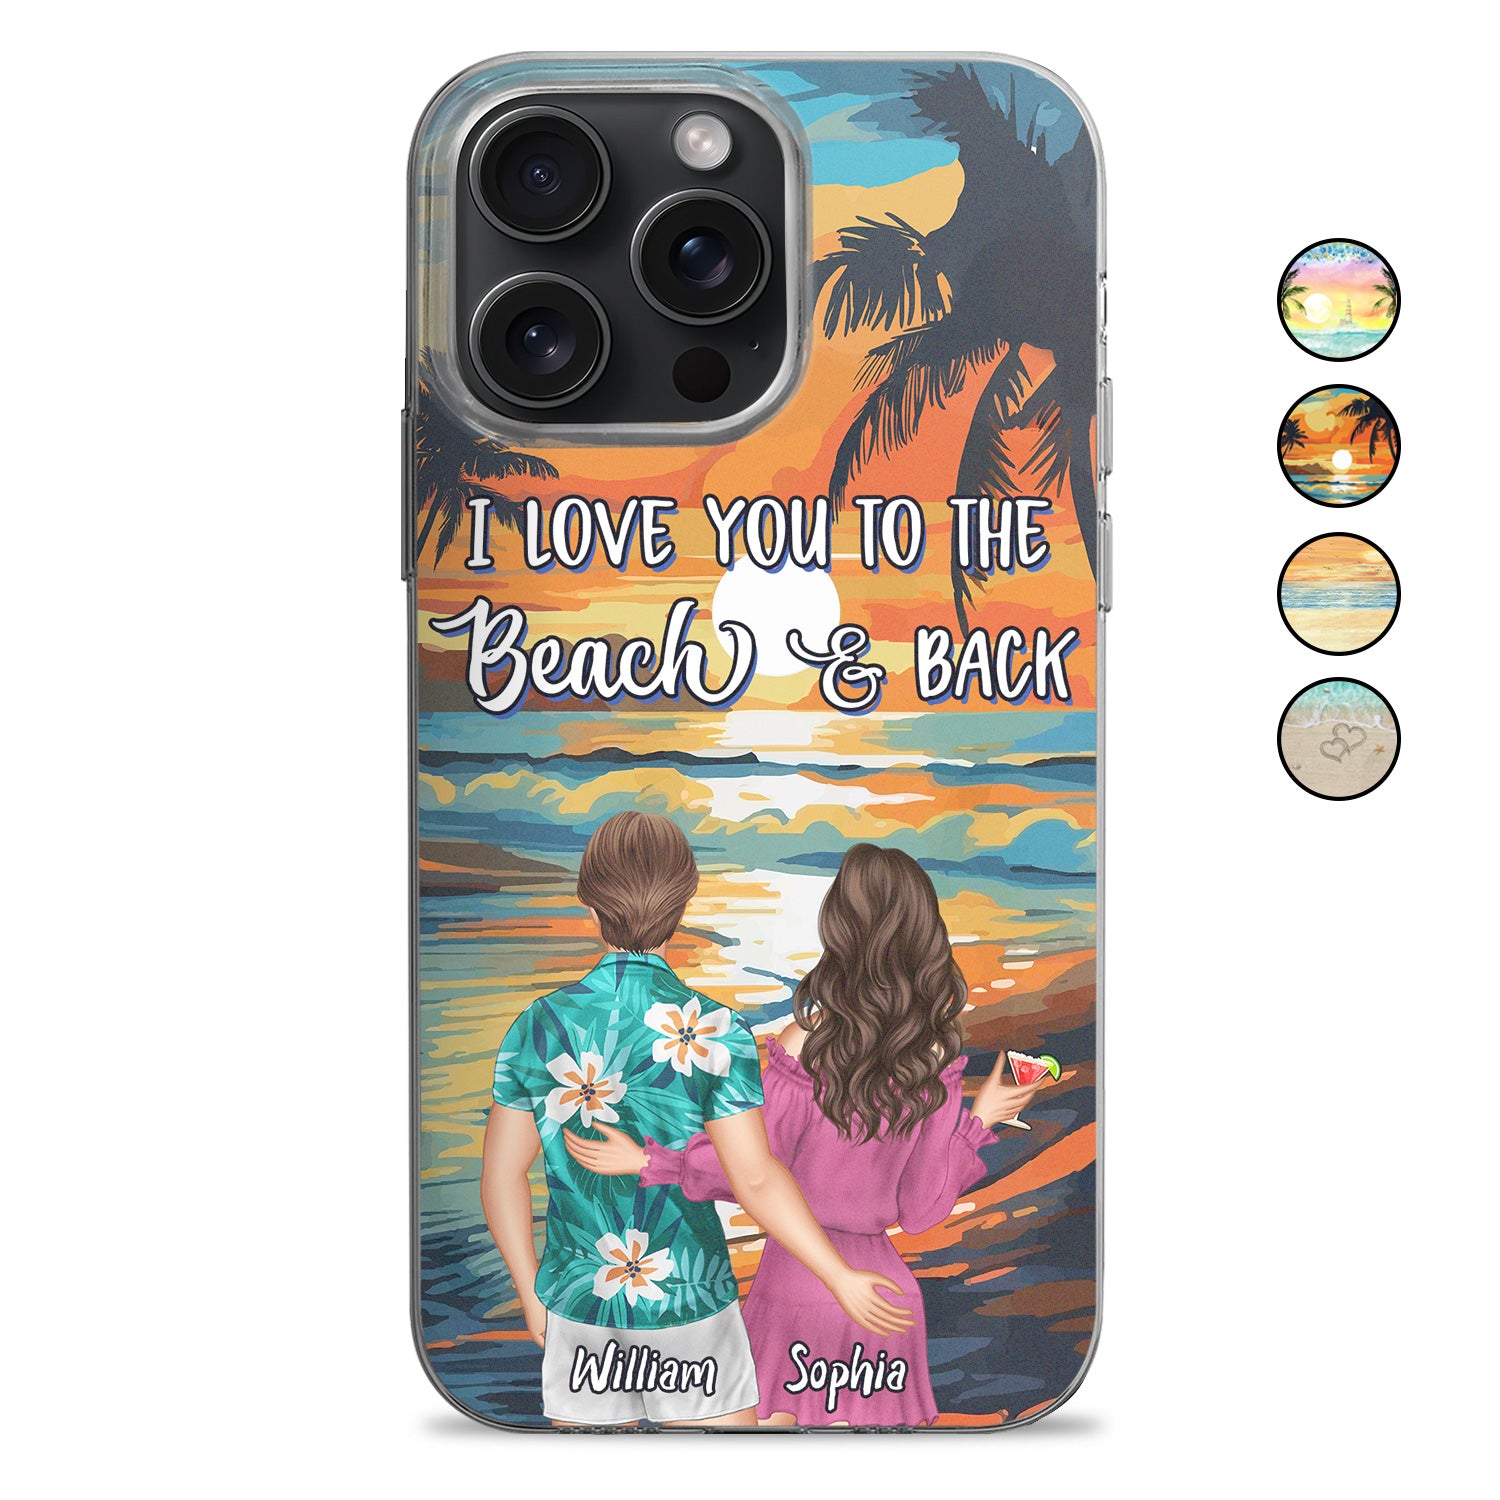 I Love You To The Beach And Back - Anniversary, Vacation, Funny Gift For Couples, Husband, Wife - Personalized Clear Phone Case